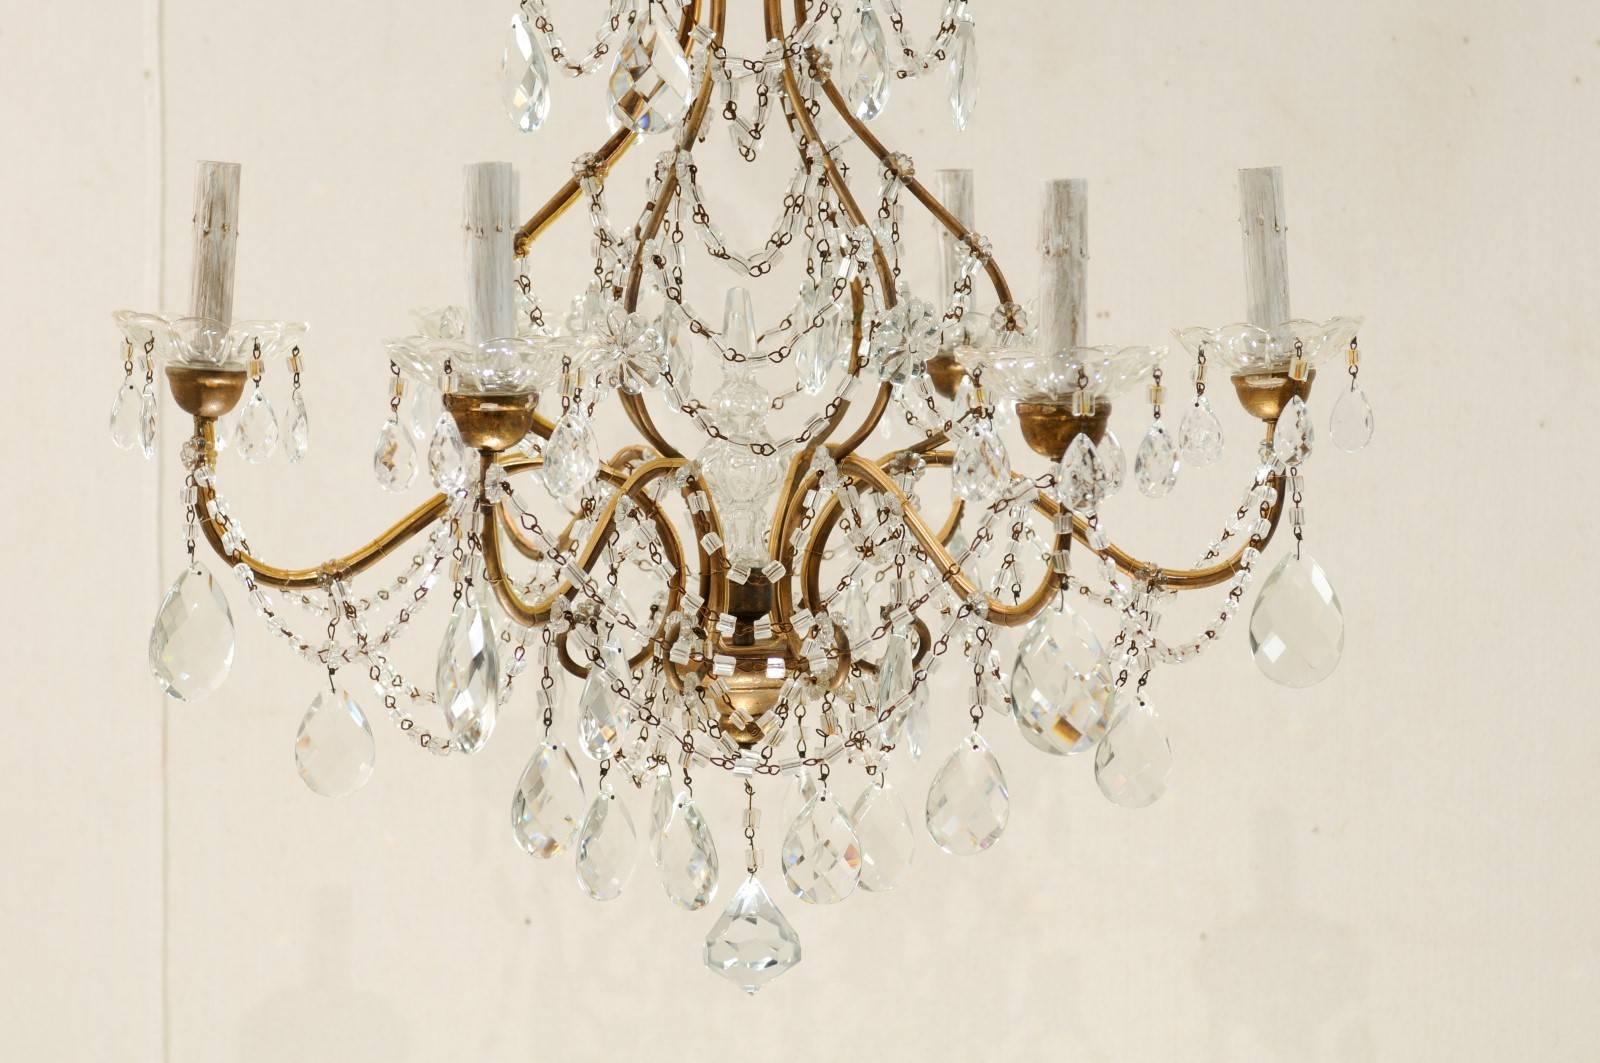 Pair of Italian Mid-Century Crystal Chandeliers with Six-Lights Each, Gold Hue 2